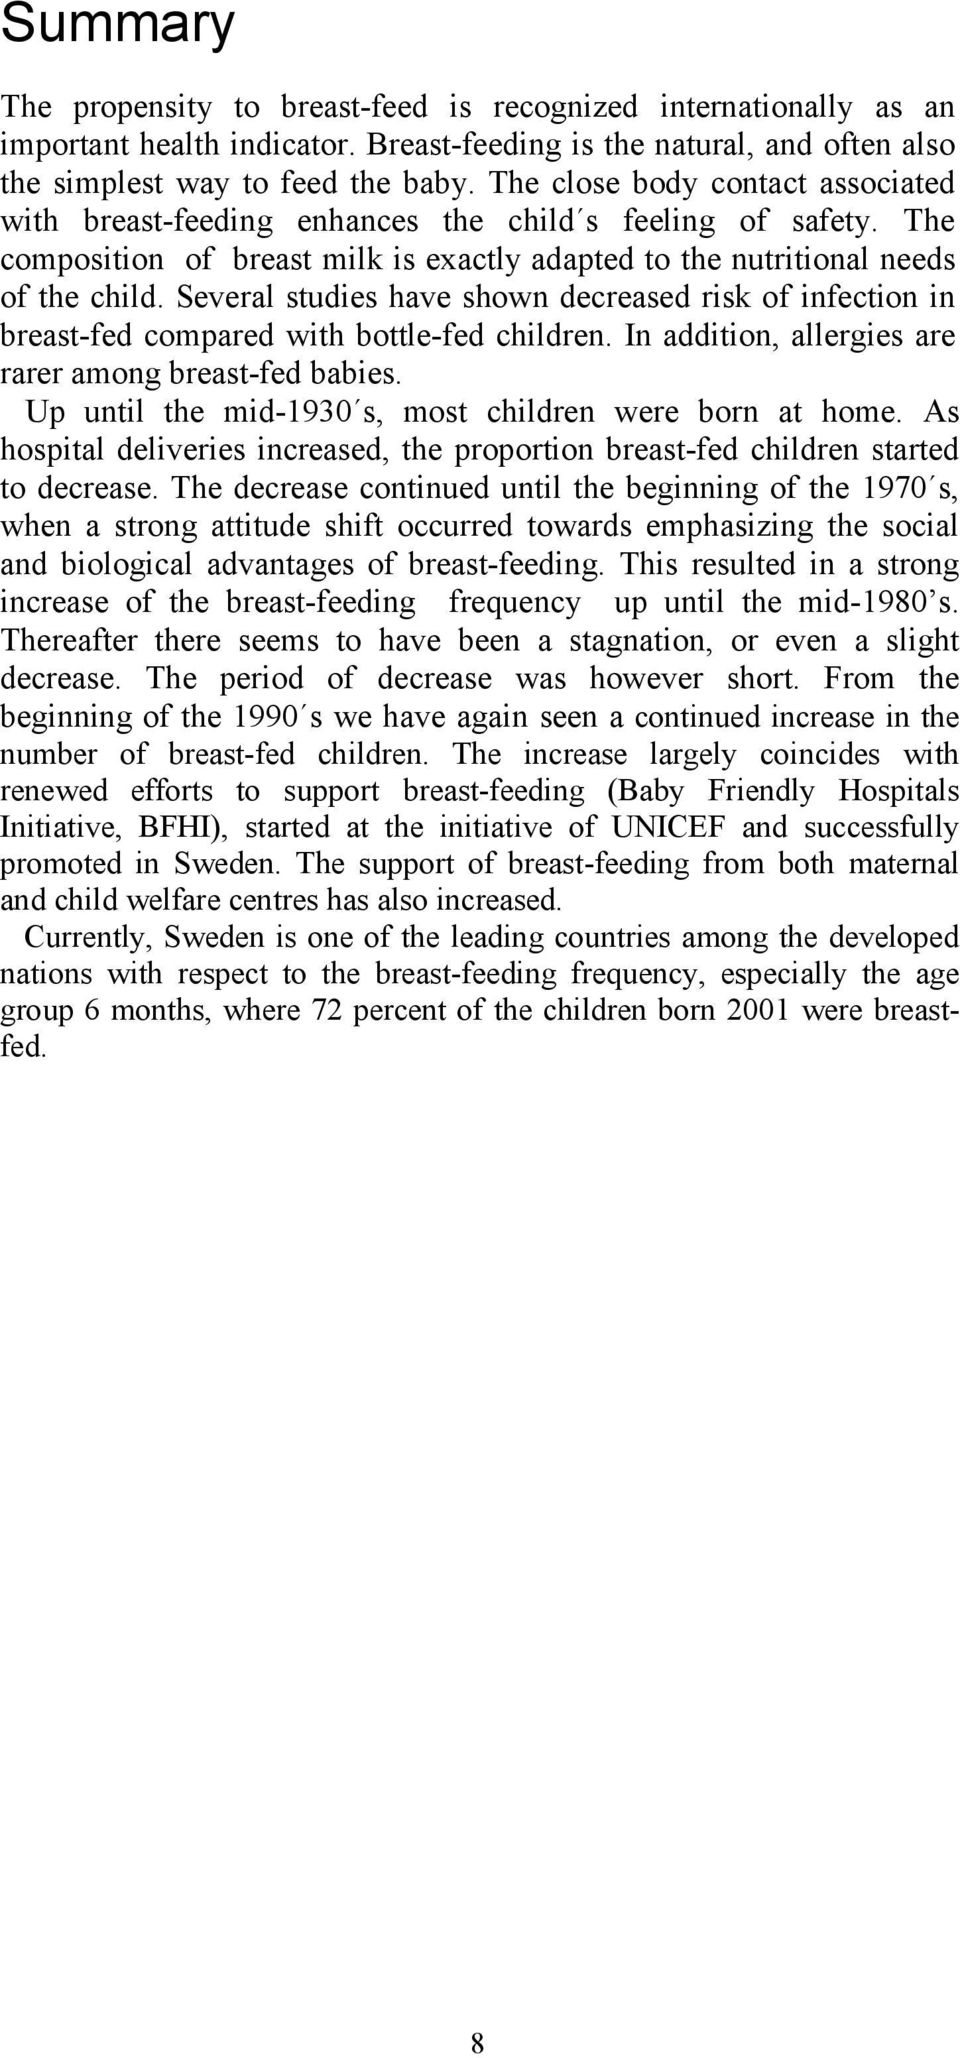 Several studies have shown decreased risk of infection in breast-fed compared with bottle-fed children. In addition, allergies are rarer among breast-fed babies.